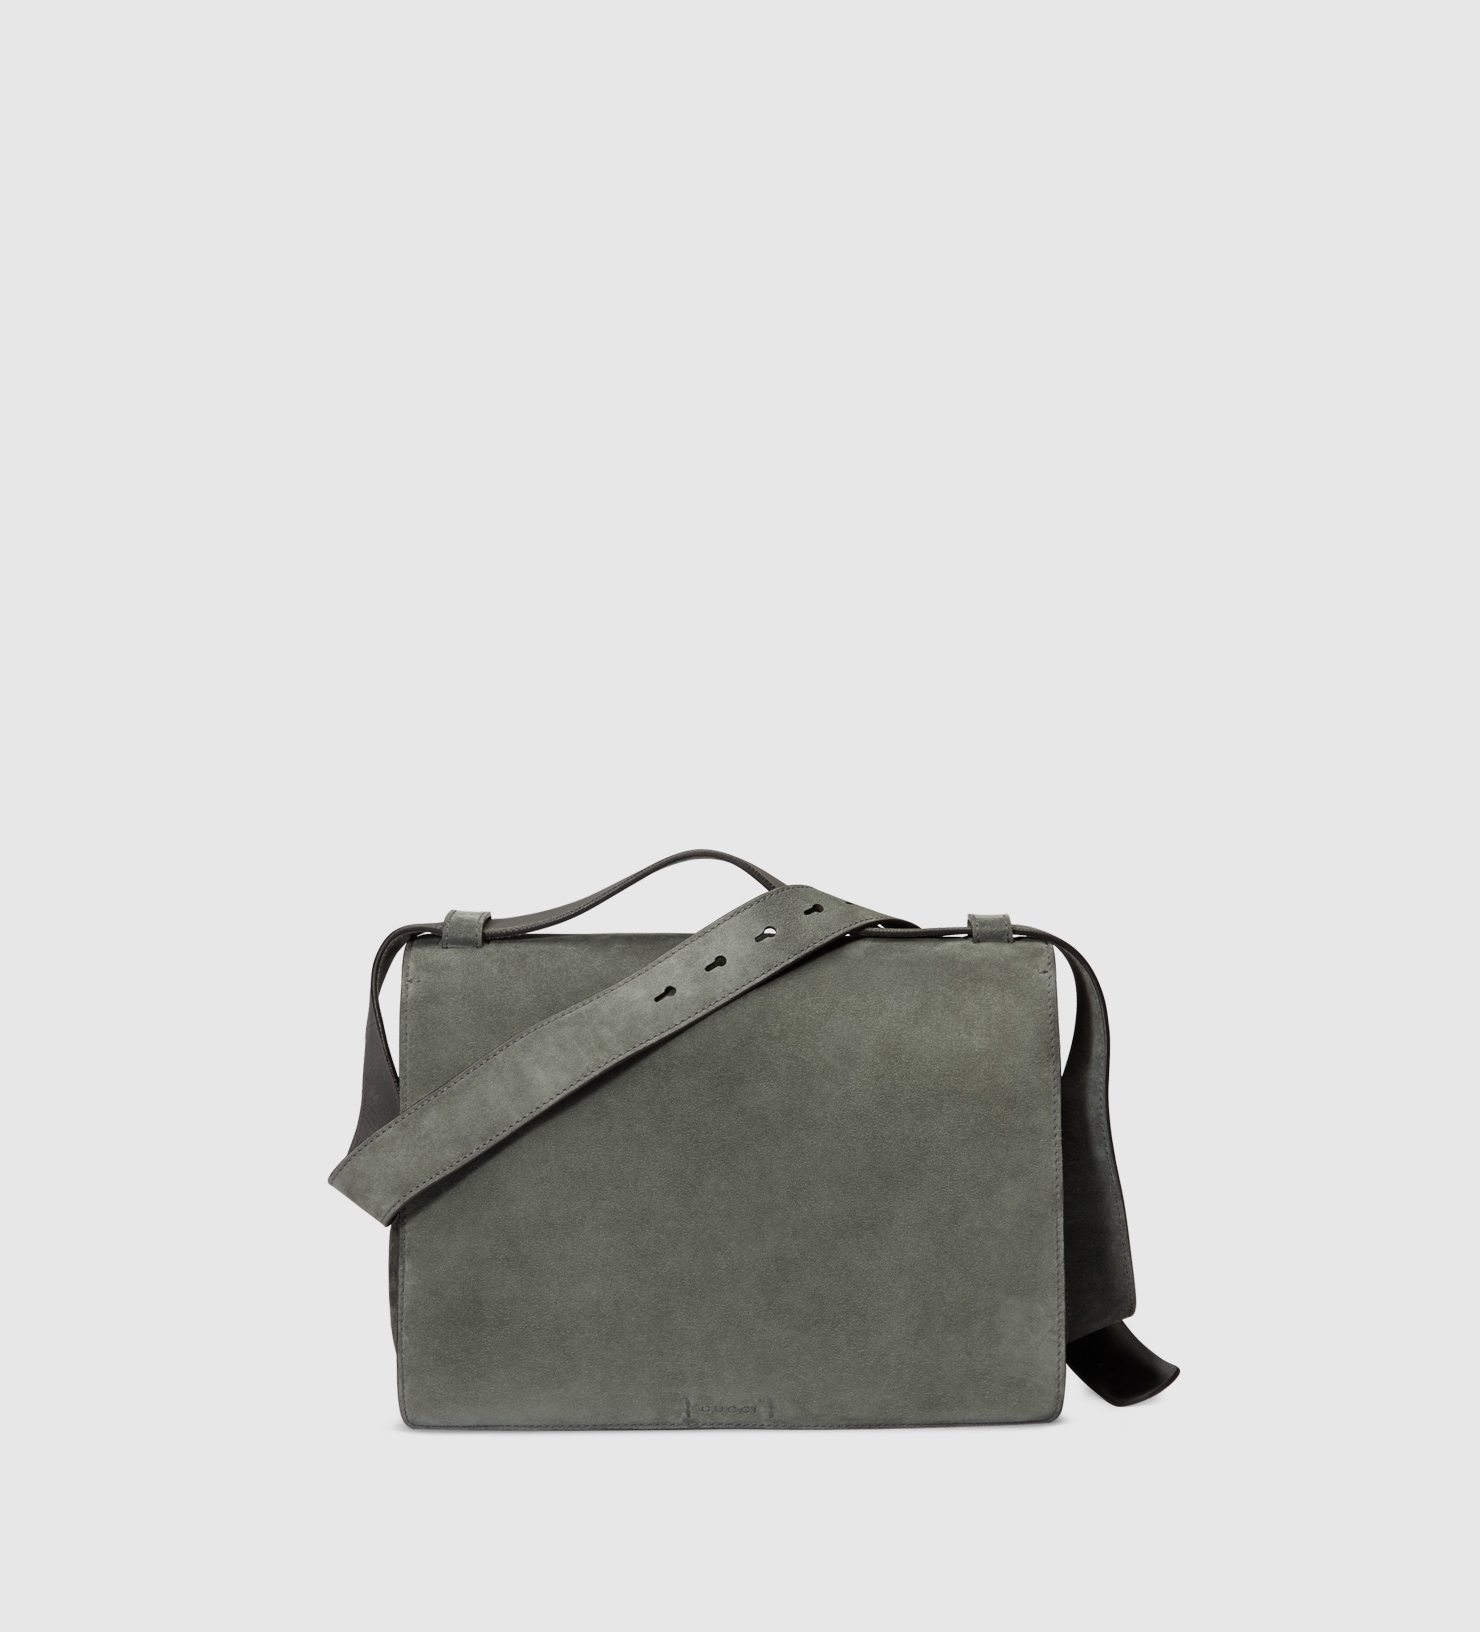 Lyst - Gucci Suede Messenger Bag With Tiger Head in Gray for Men